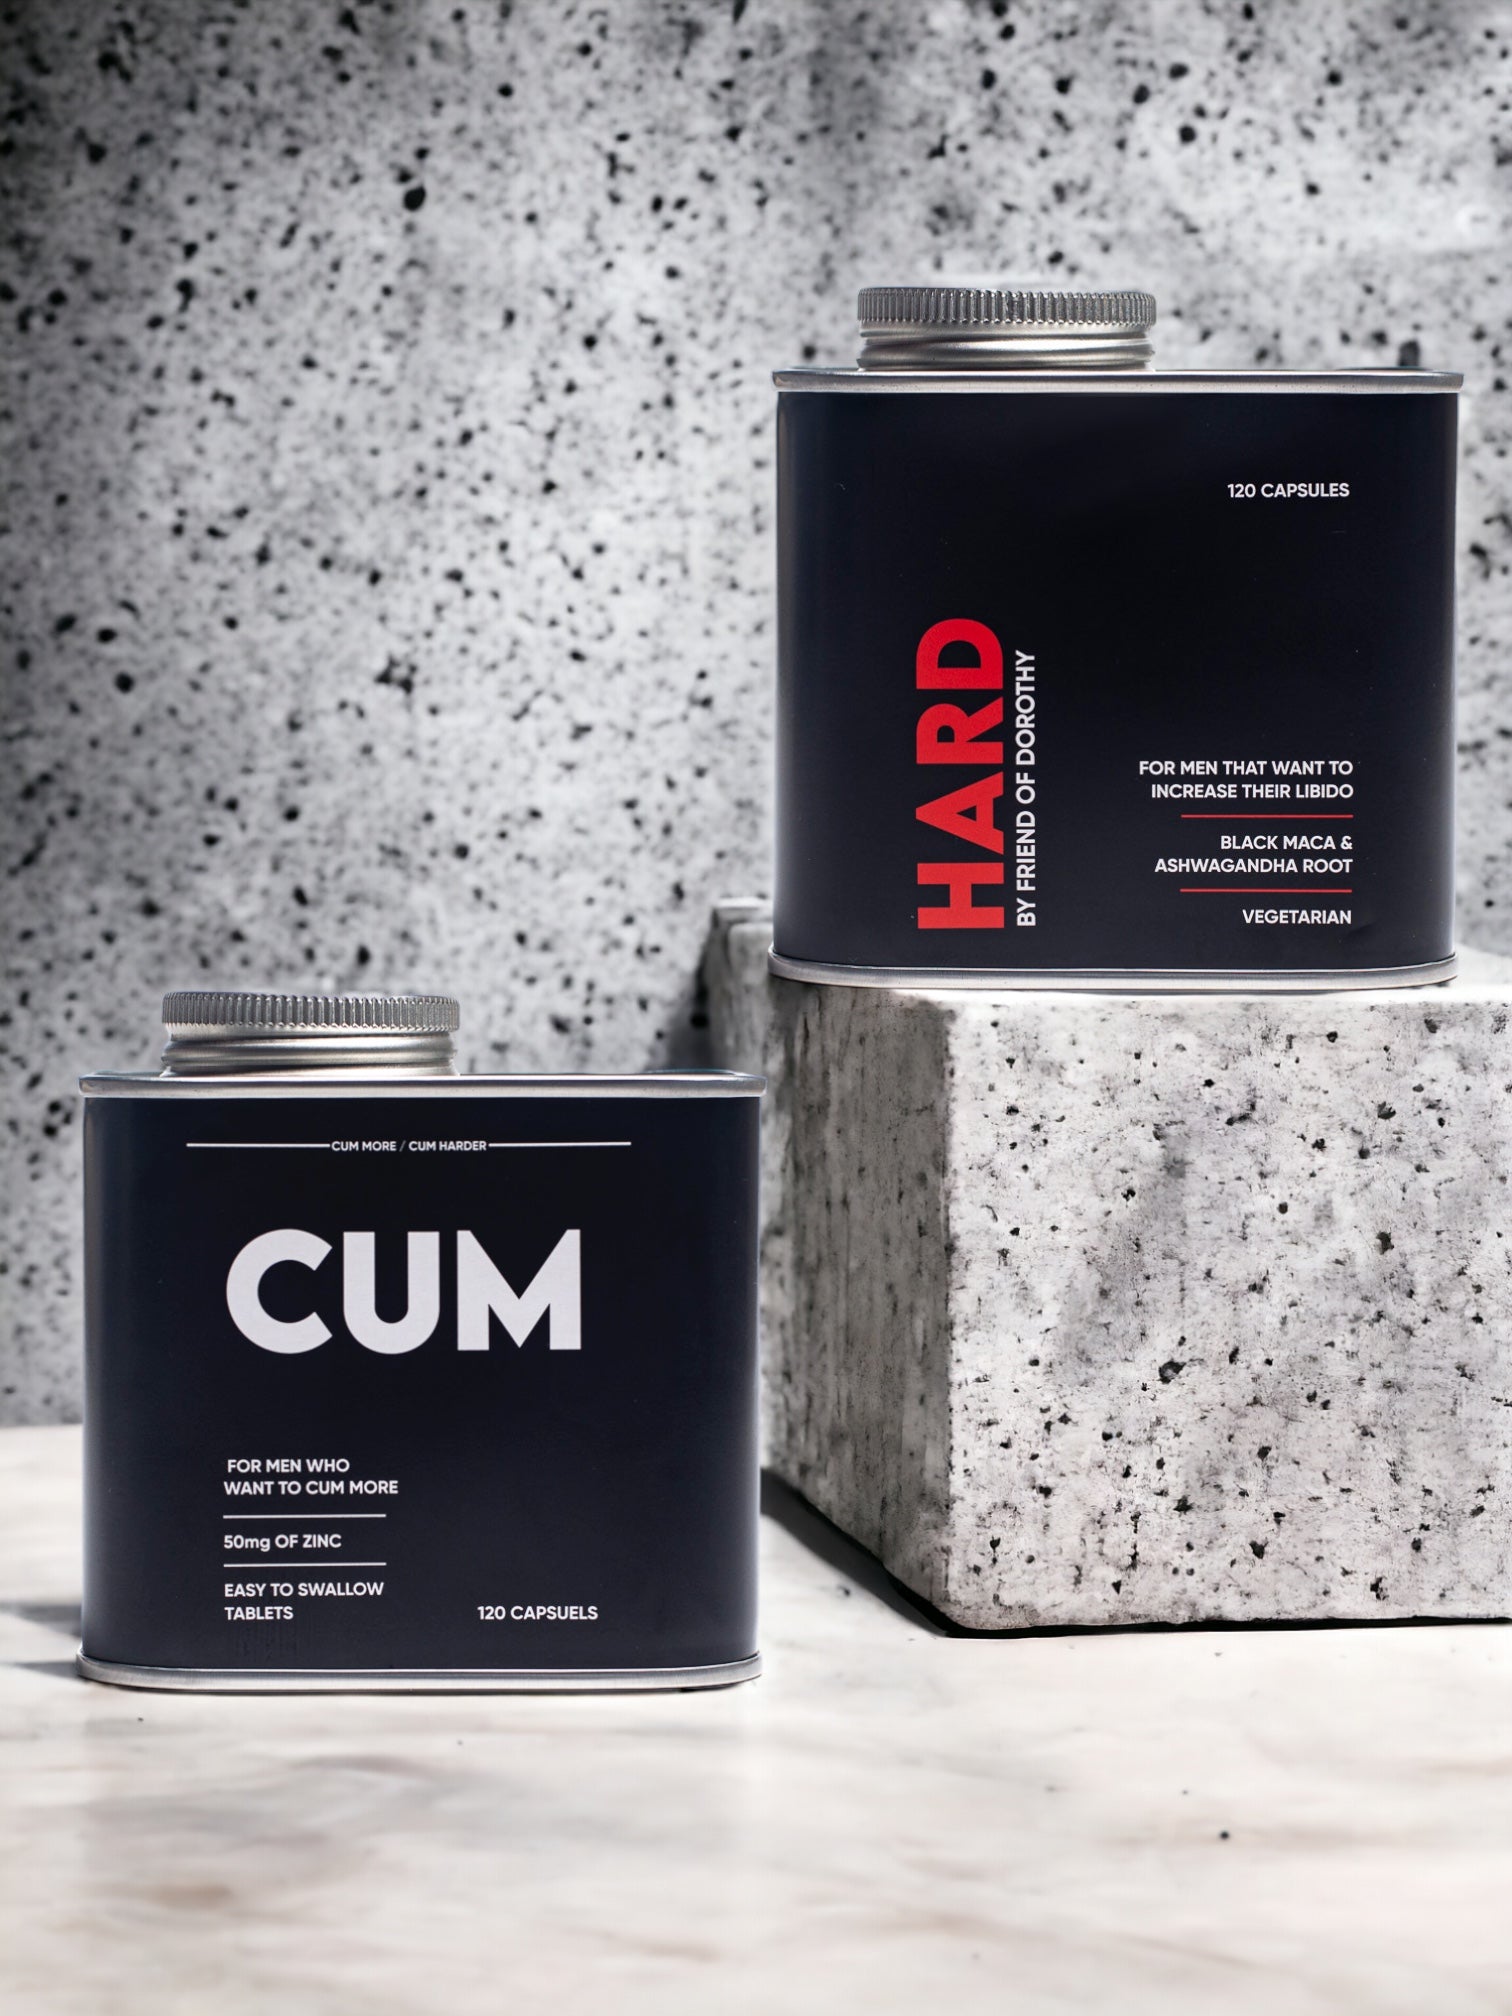 C*M HARD XXL bundle (Subscribe and save 15%) - increase your libido and cum harder